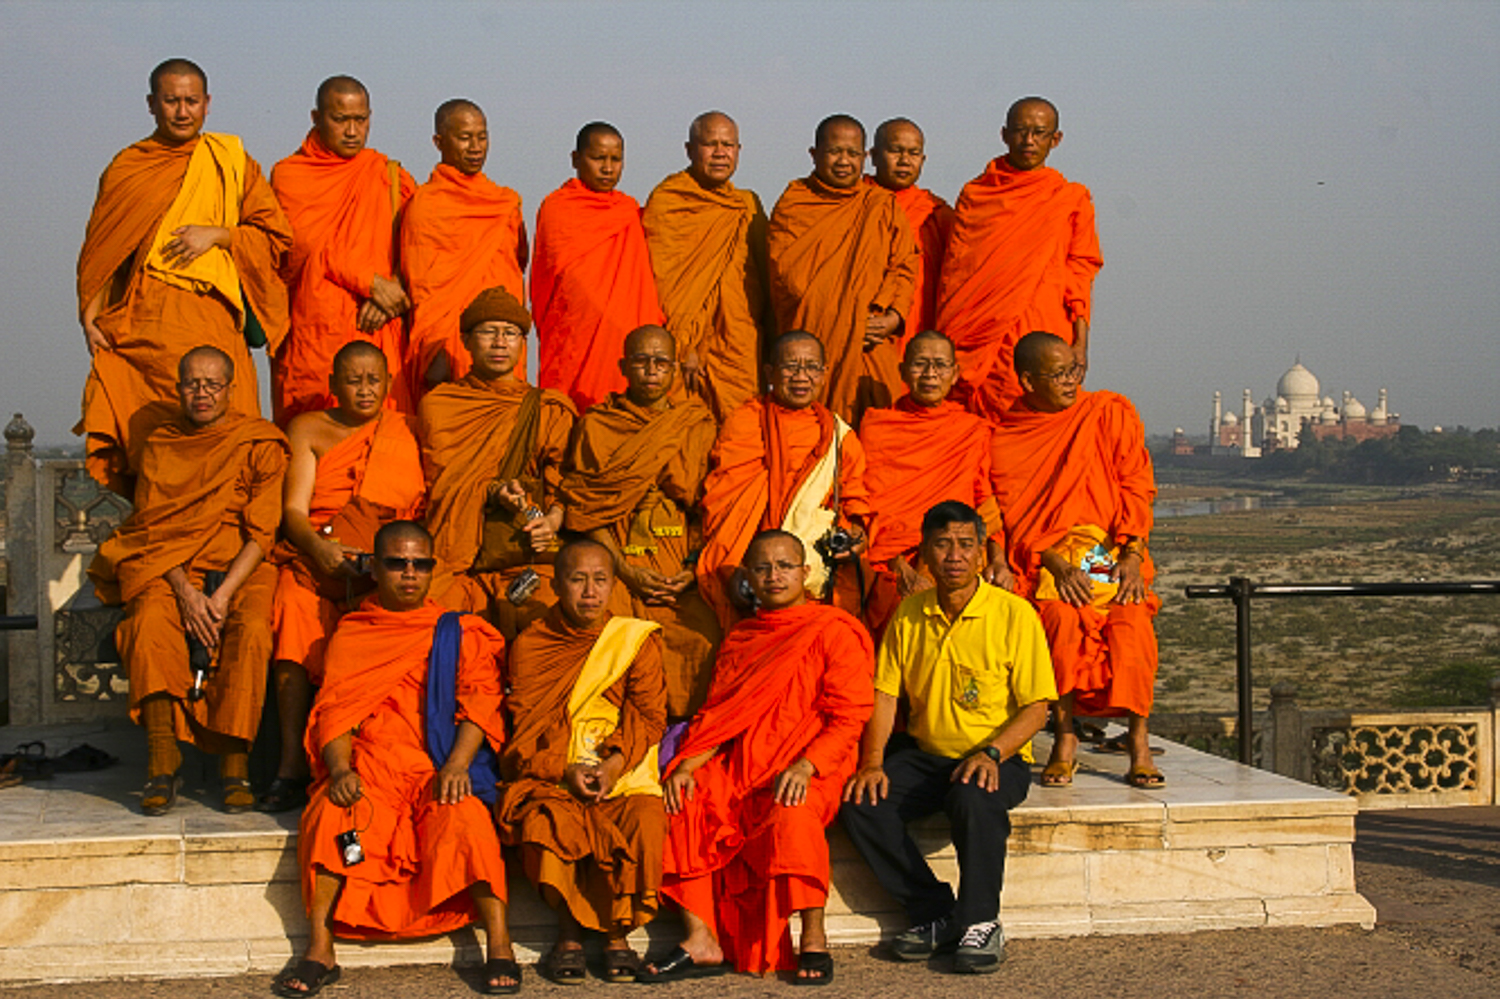 Monks at the Red Fort in Agra India